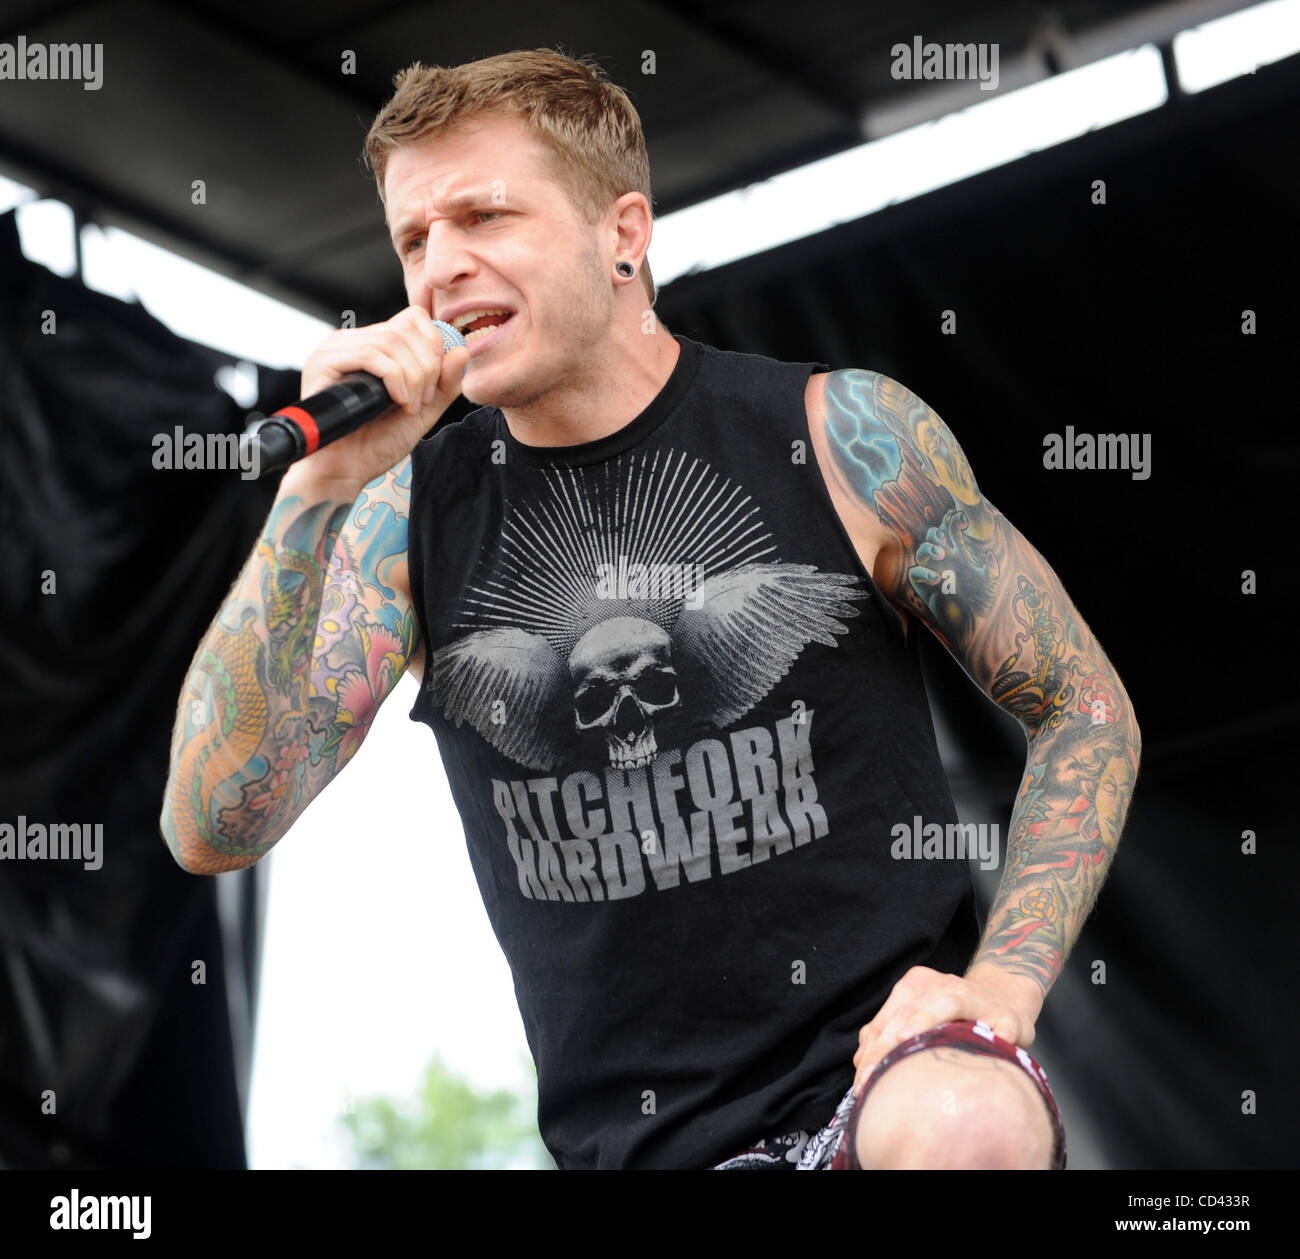 July 25, 2008 - Raleigh, North Carolina; USA - Singer ALEX VARKATZAS of the  band Atreyu performs live as the 2008 Projekt Revolution Tour makes a stop  at the Time Warner Cable